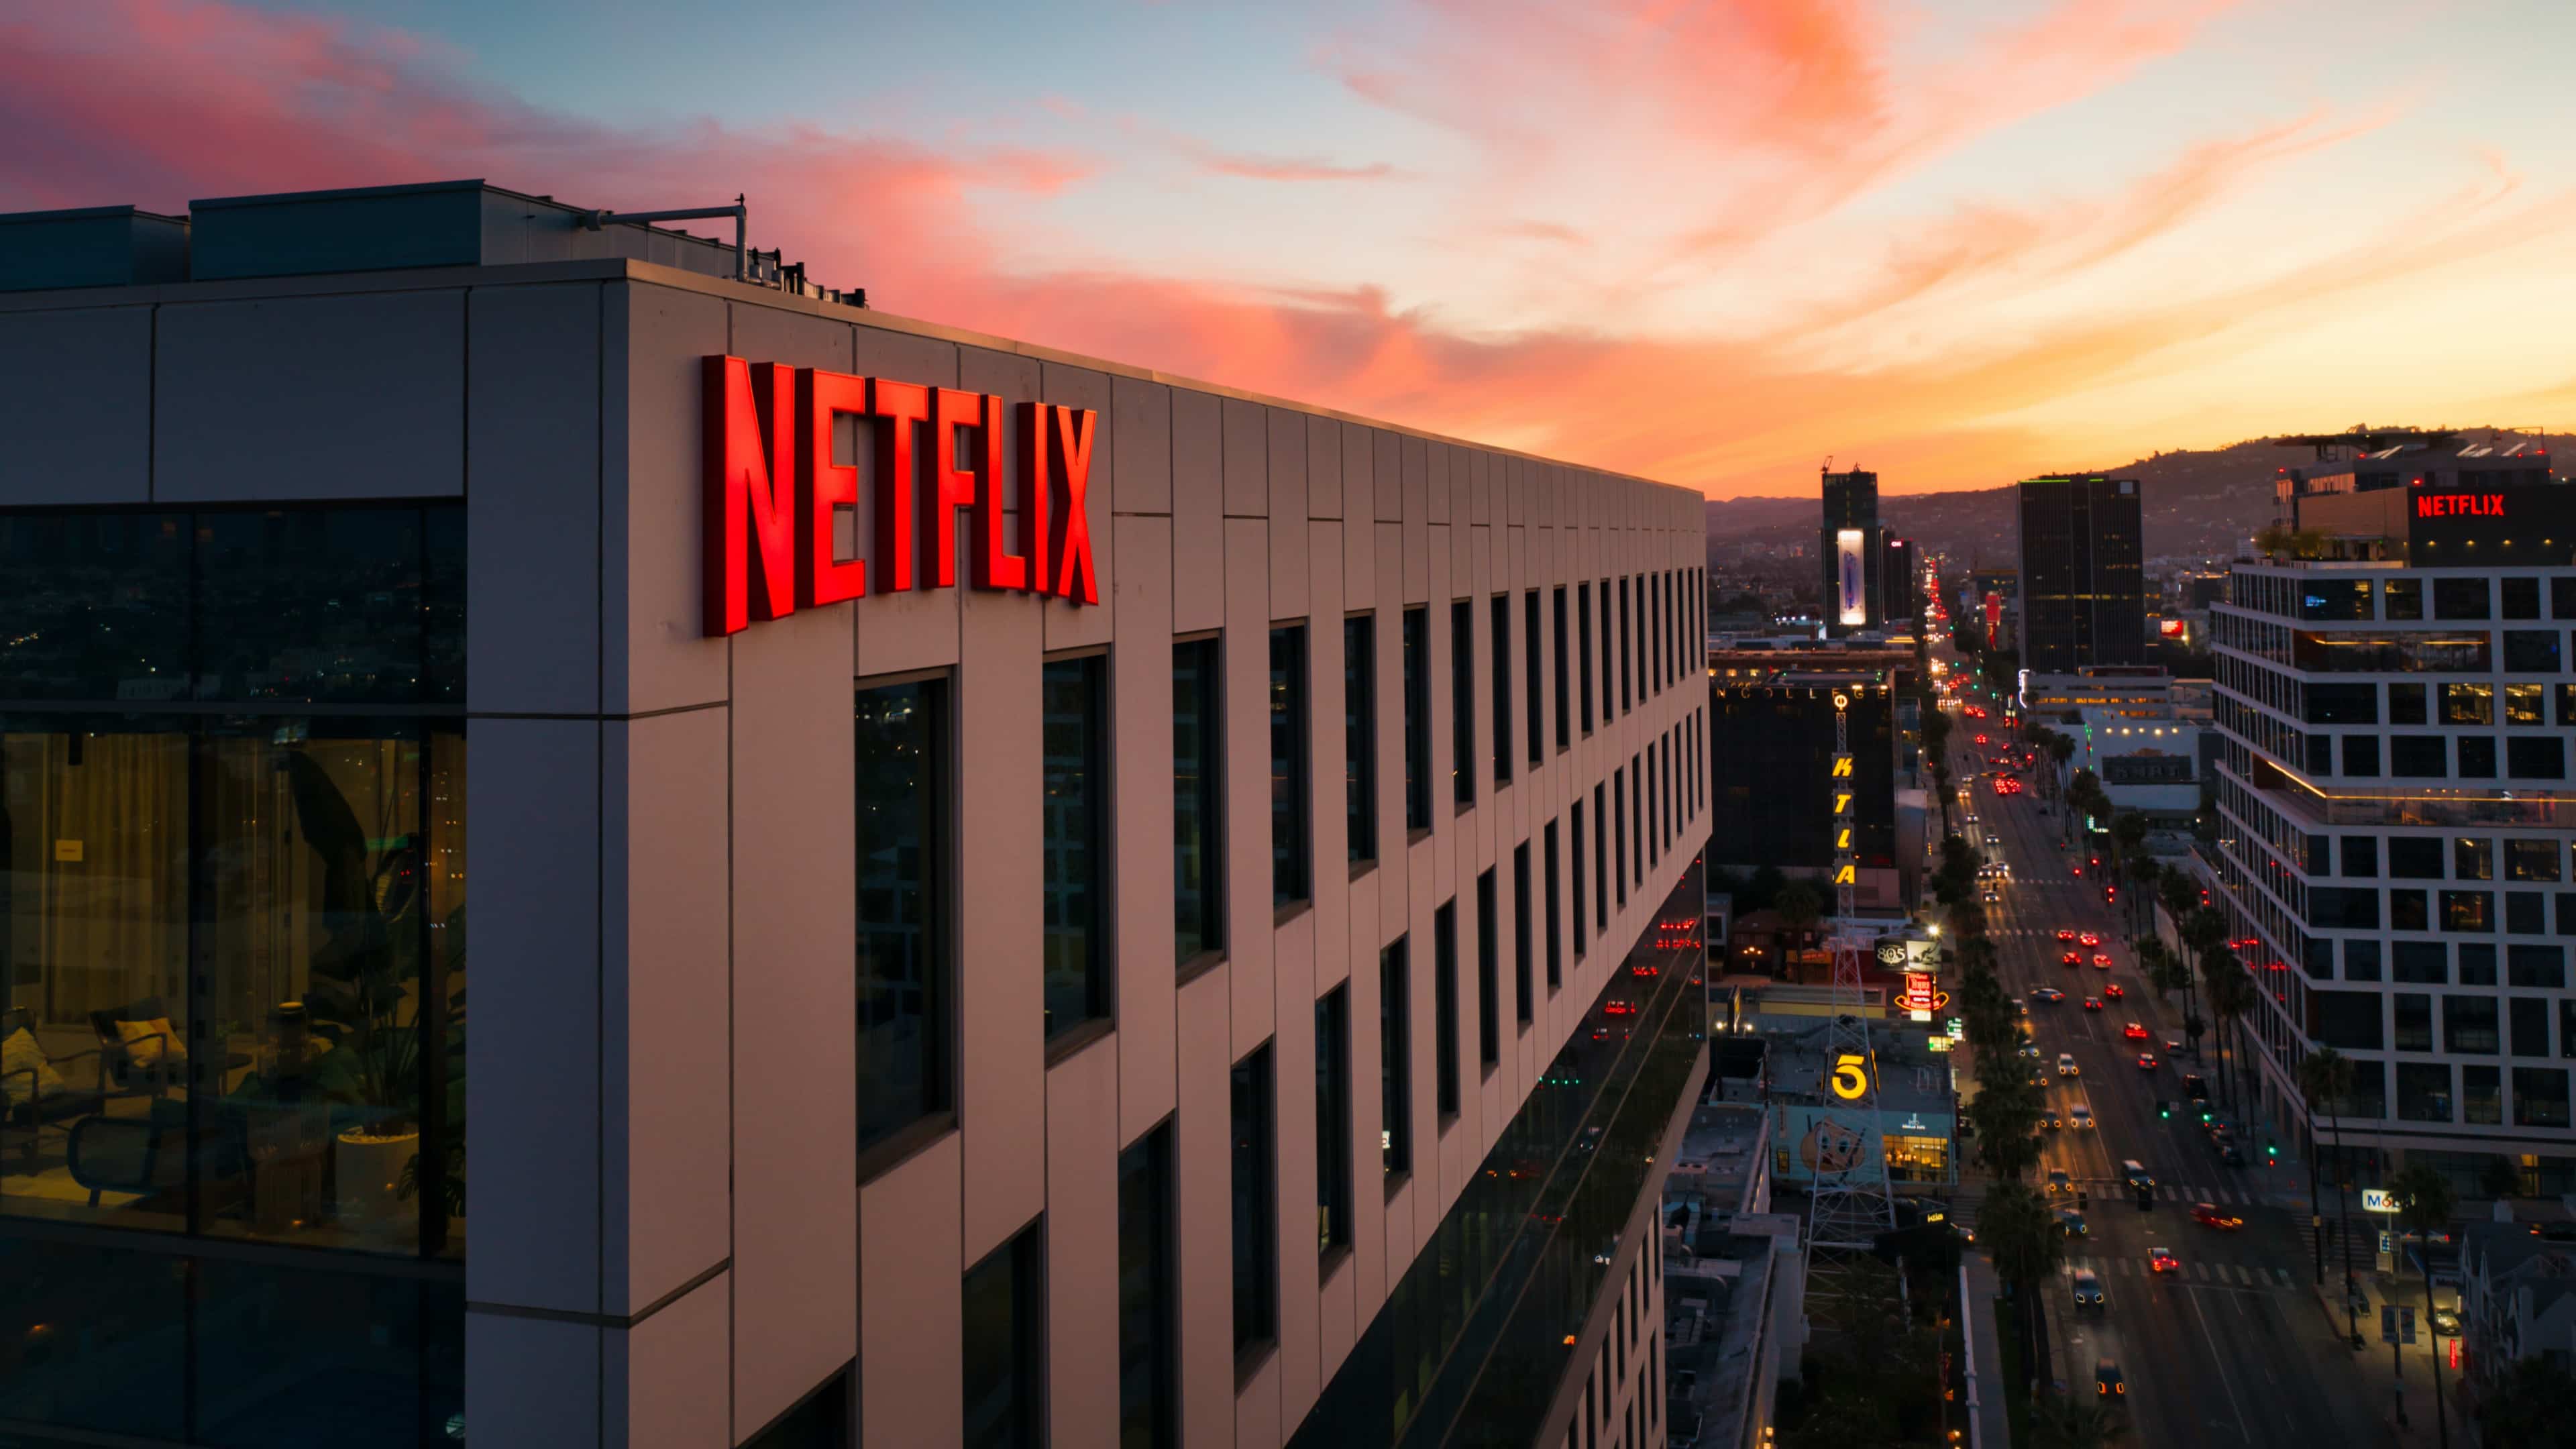 A Netflix logo sign on a building in Hollywood, Los Angeles at sunset